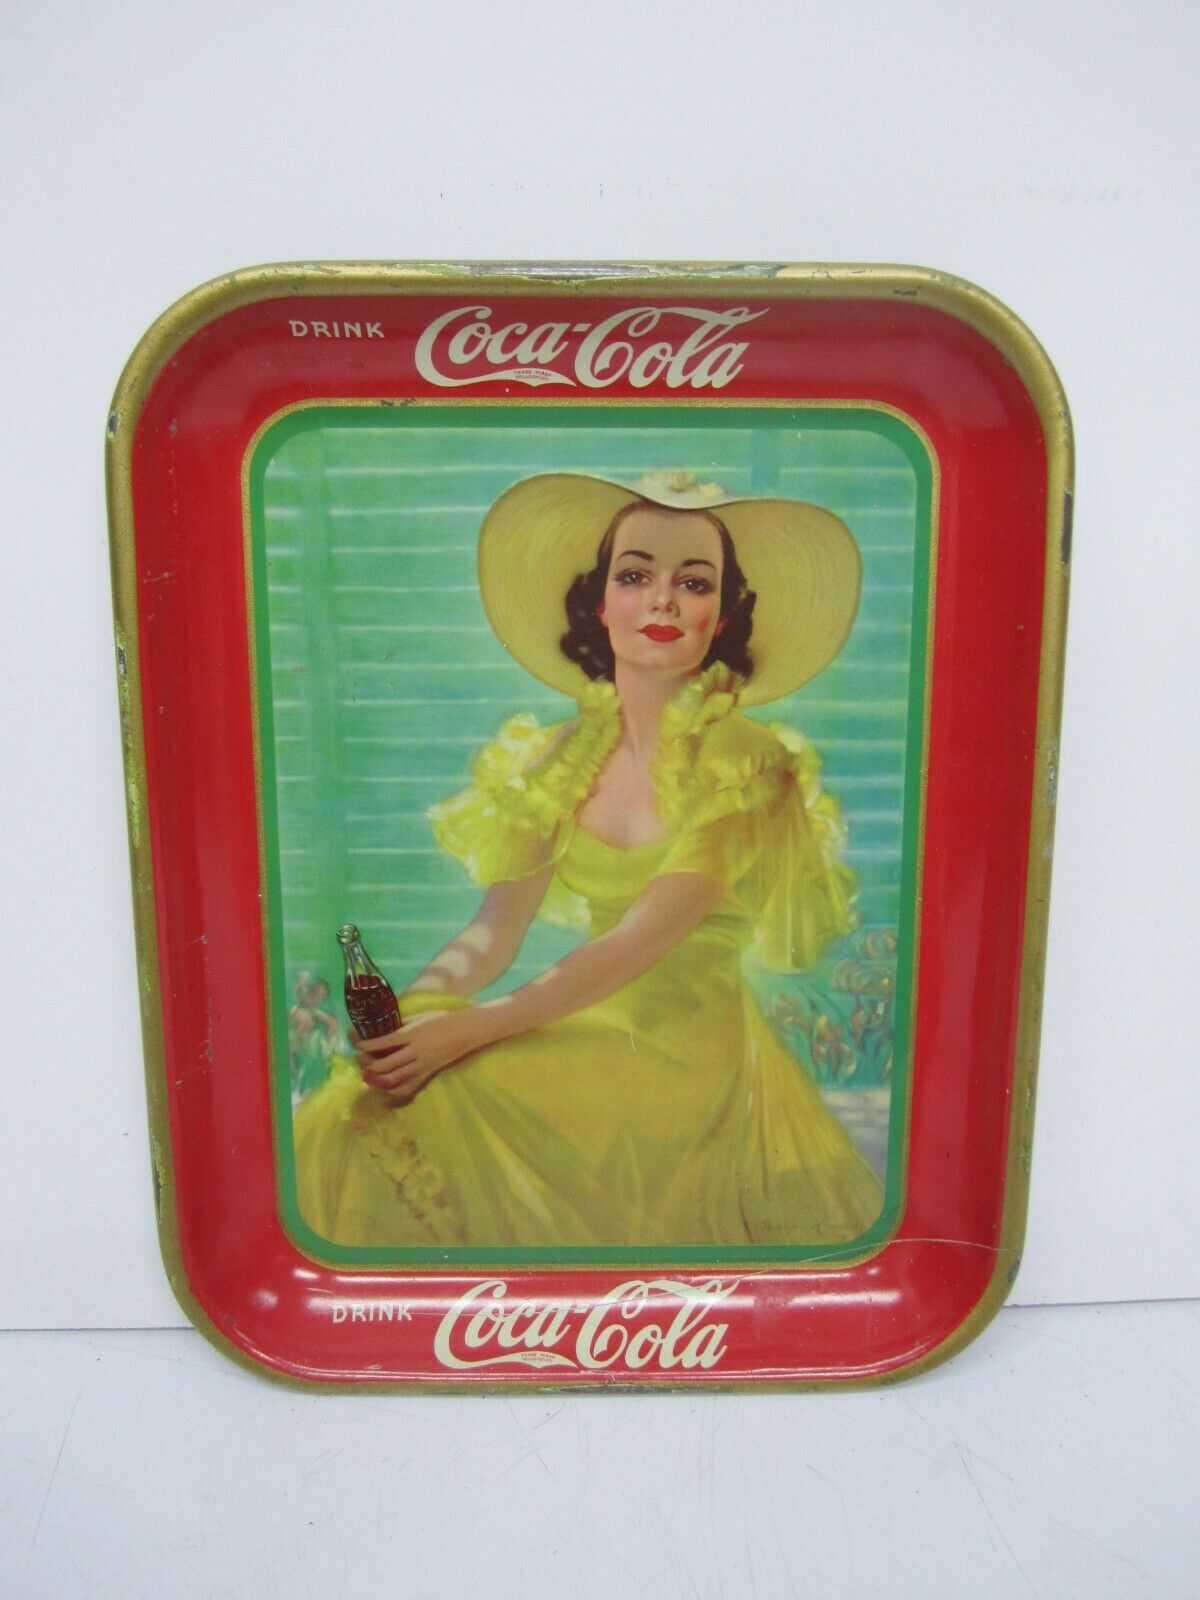 Vtg 1938 Drink Coca Cola Coke Soda Advertising Tray Girl Yellow Dress Afternoon